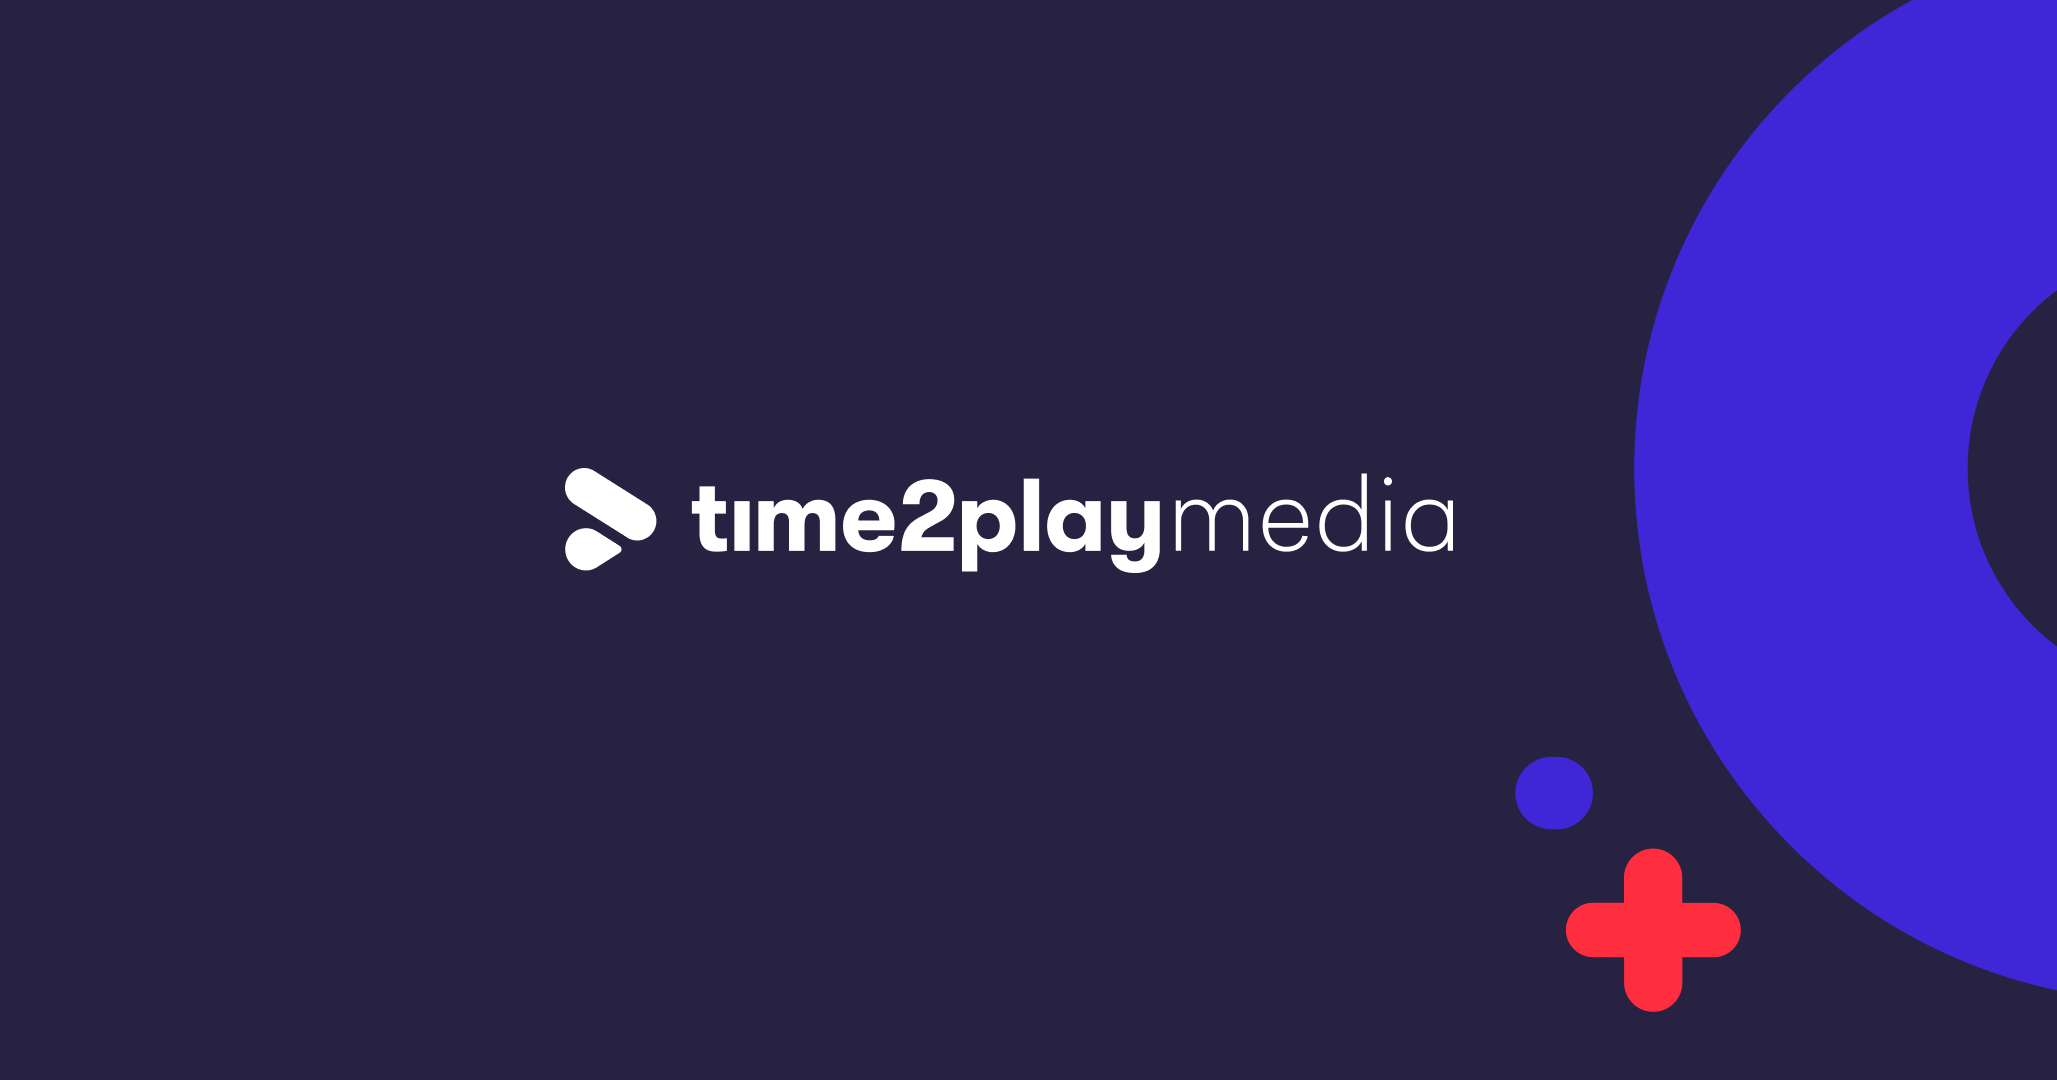 We’re Now Time2play Media